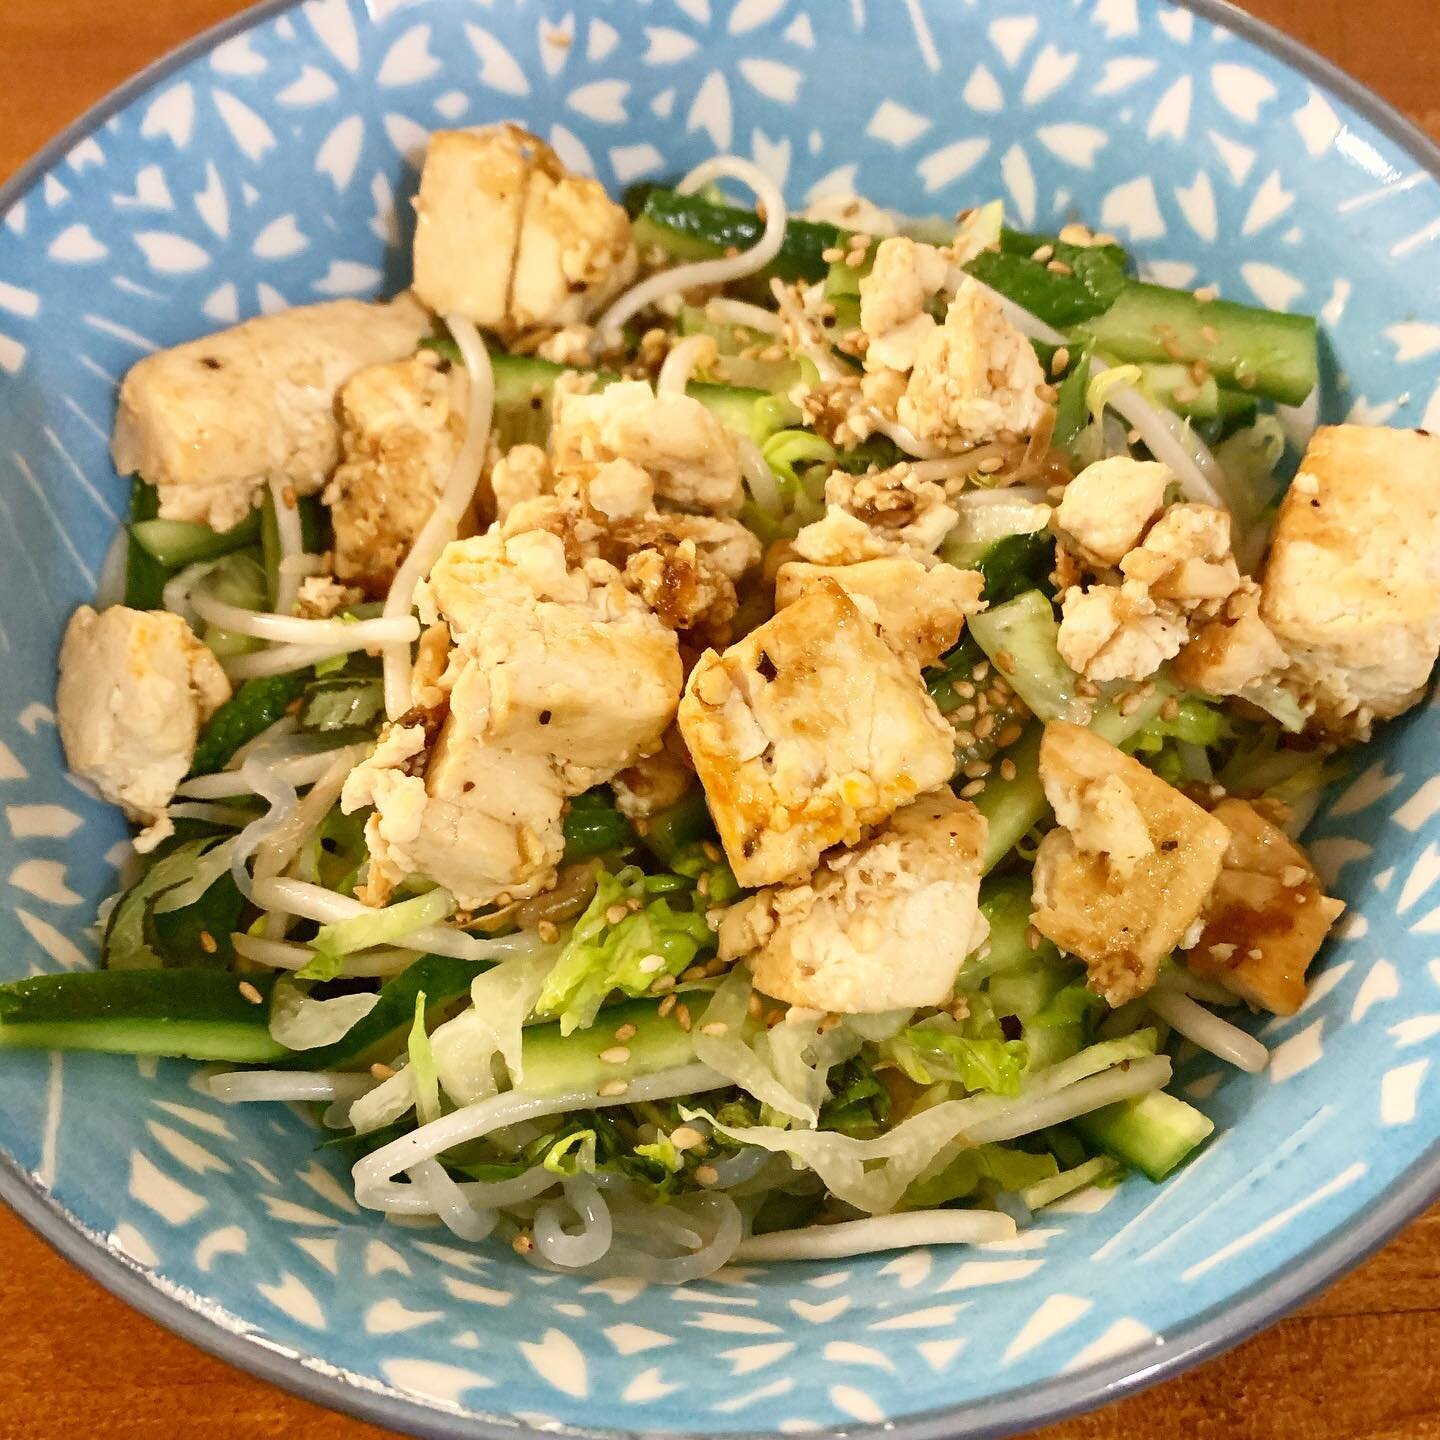 Vietnamese tofu &amp; noodle salad 

This was really fun for me to re create because during my college years at Boulder my friends and I went to the farmers market on Saturdays - 9/10 we were hungover. We would all get food and hang out in the park. 